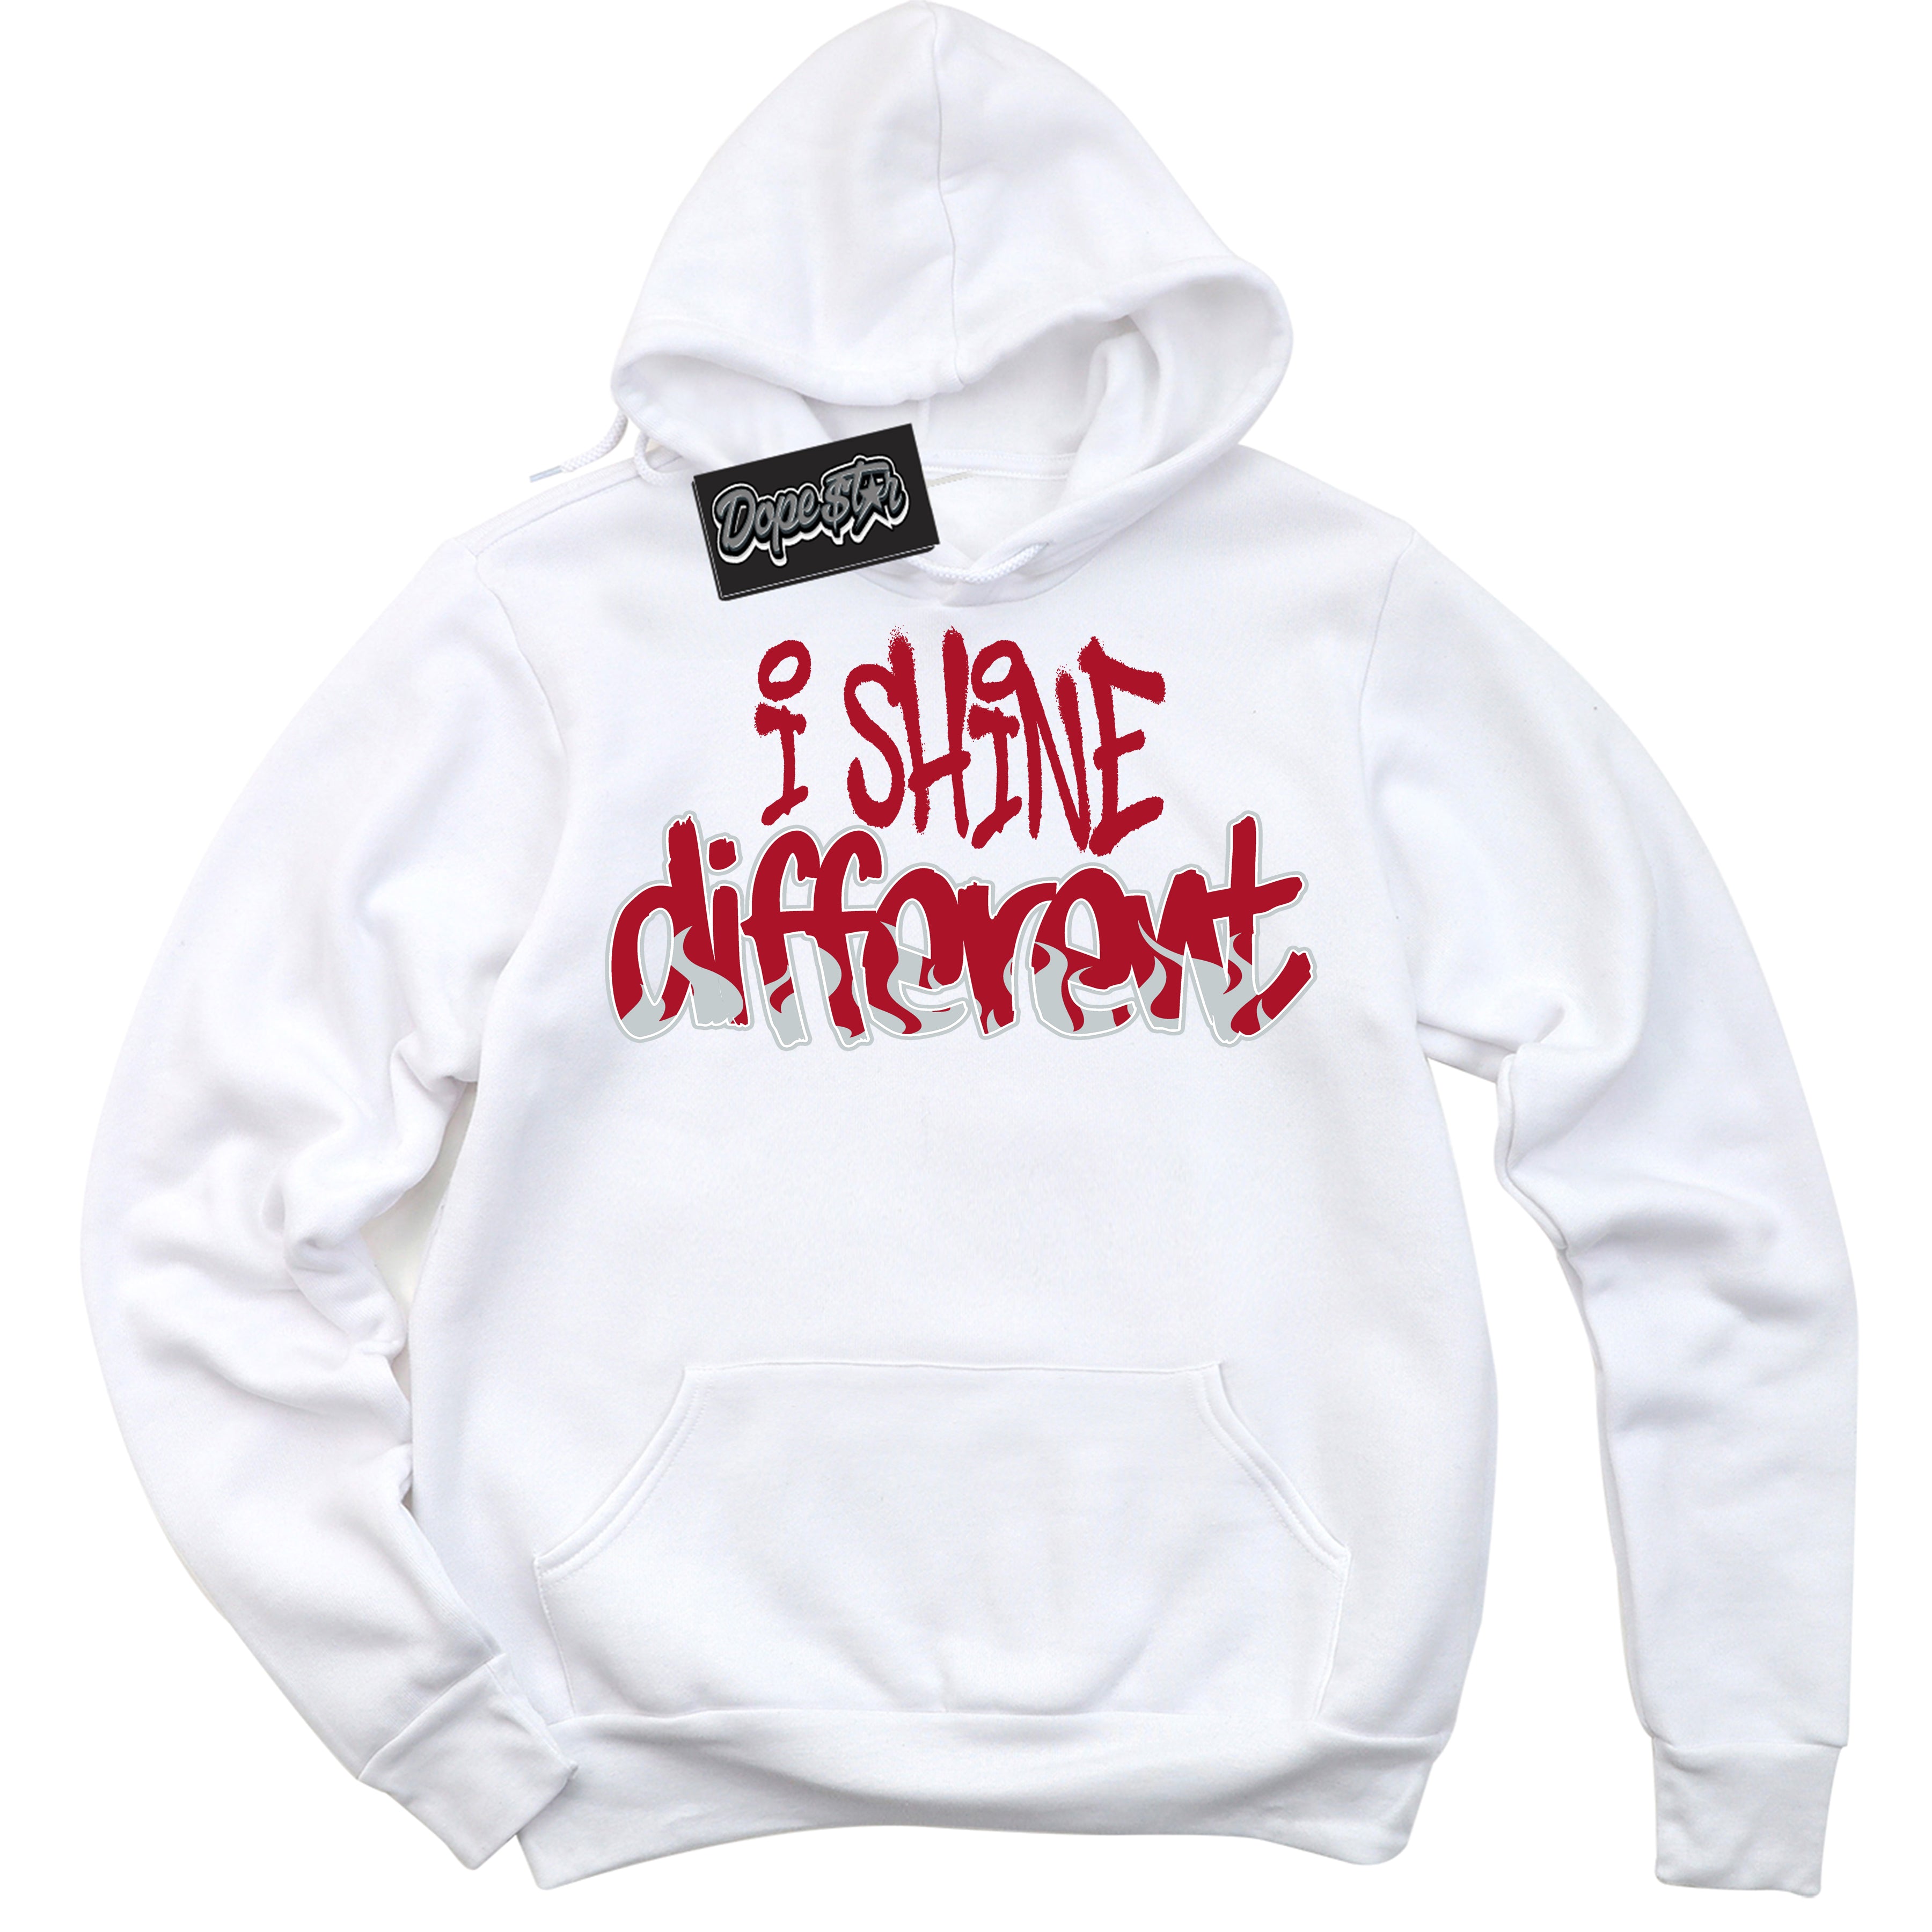 Cool White Hoodie with “ I Shine Different ”  design that Perfectly Matches Reverse Ultraman Sneakers.